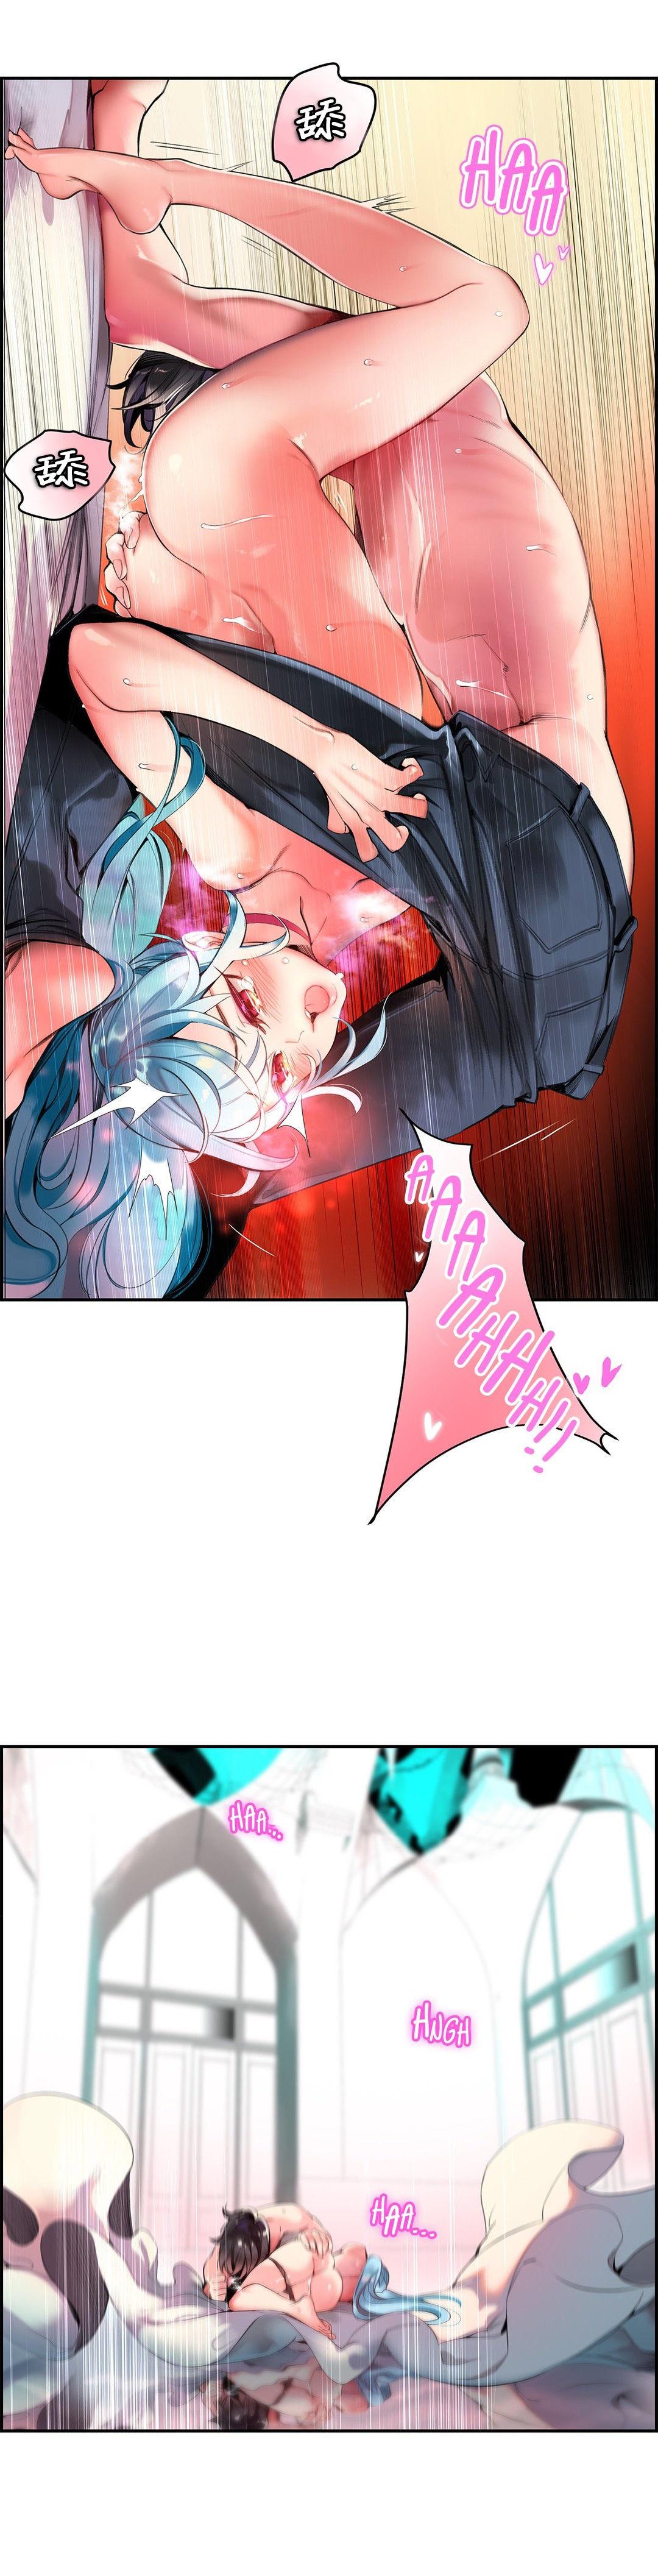 [Juder] Lilith`s Cord (第二季) Ch.61-65 [Chinese] [aaatwist个人汉化] [Ongoing] 168